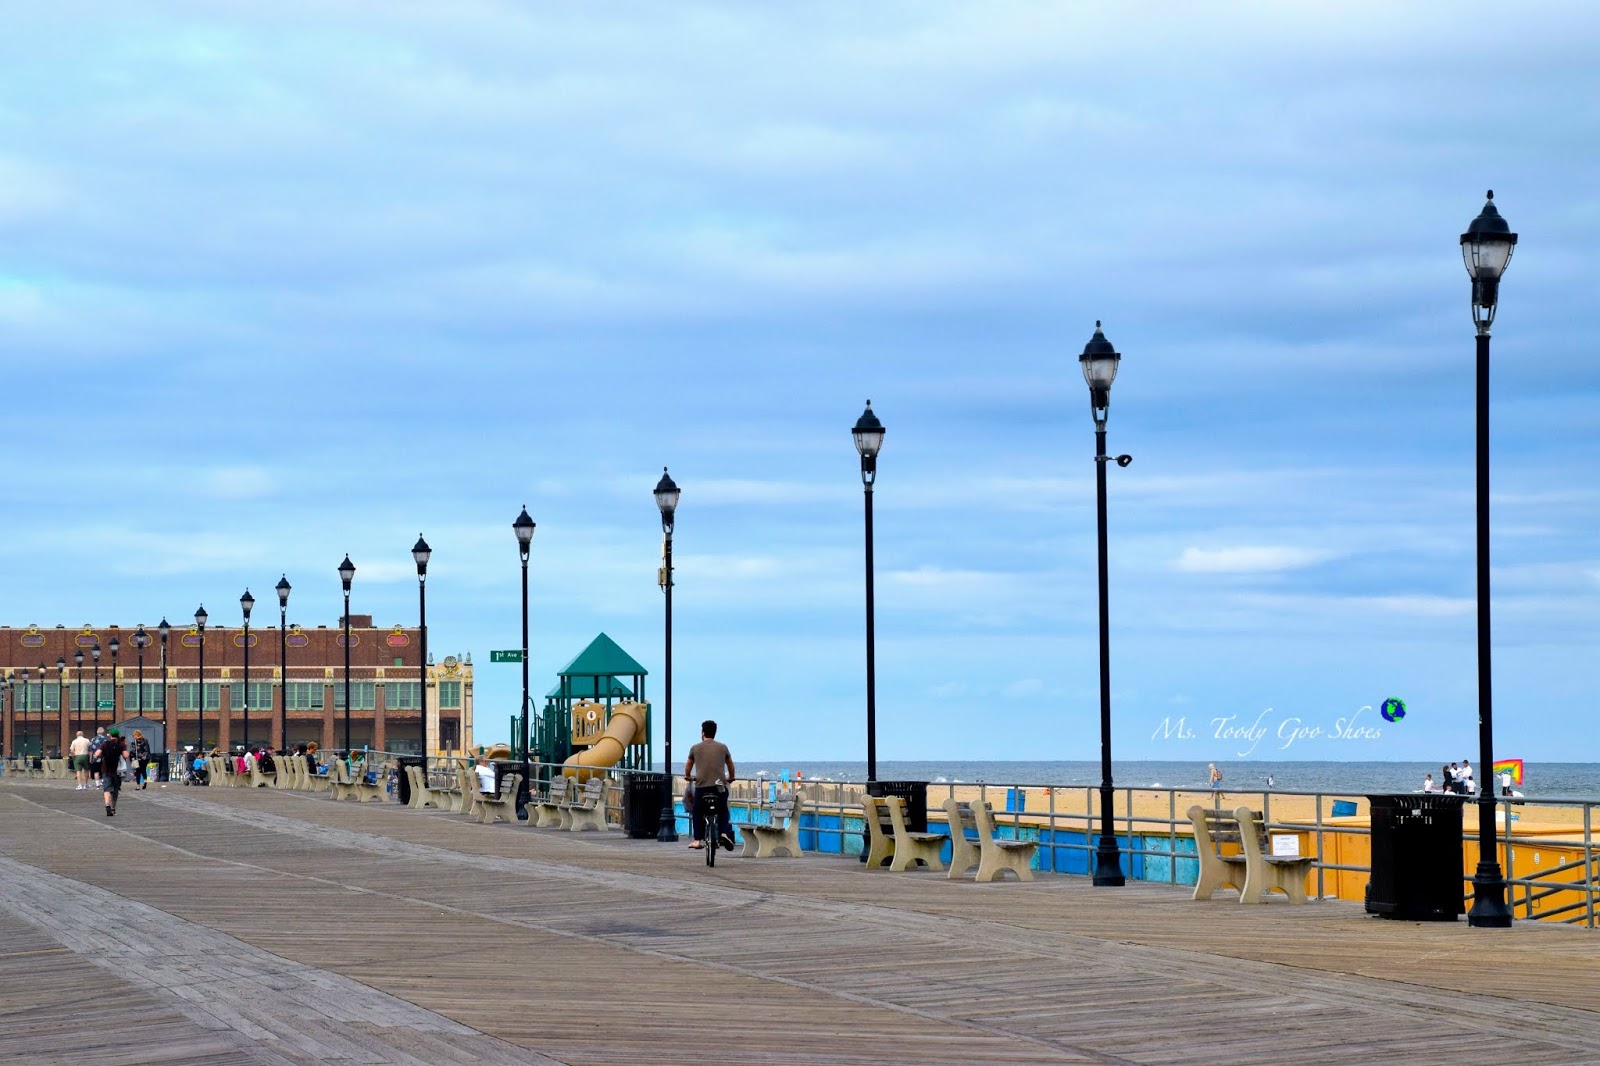 Asbury Park regularly finds itself on many of NJ's "Best" lists. Now I know why! | Ms. Toody Goo Shoes